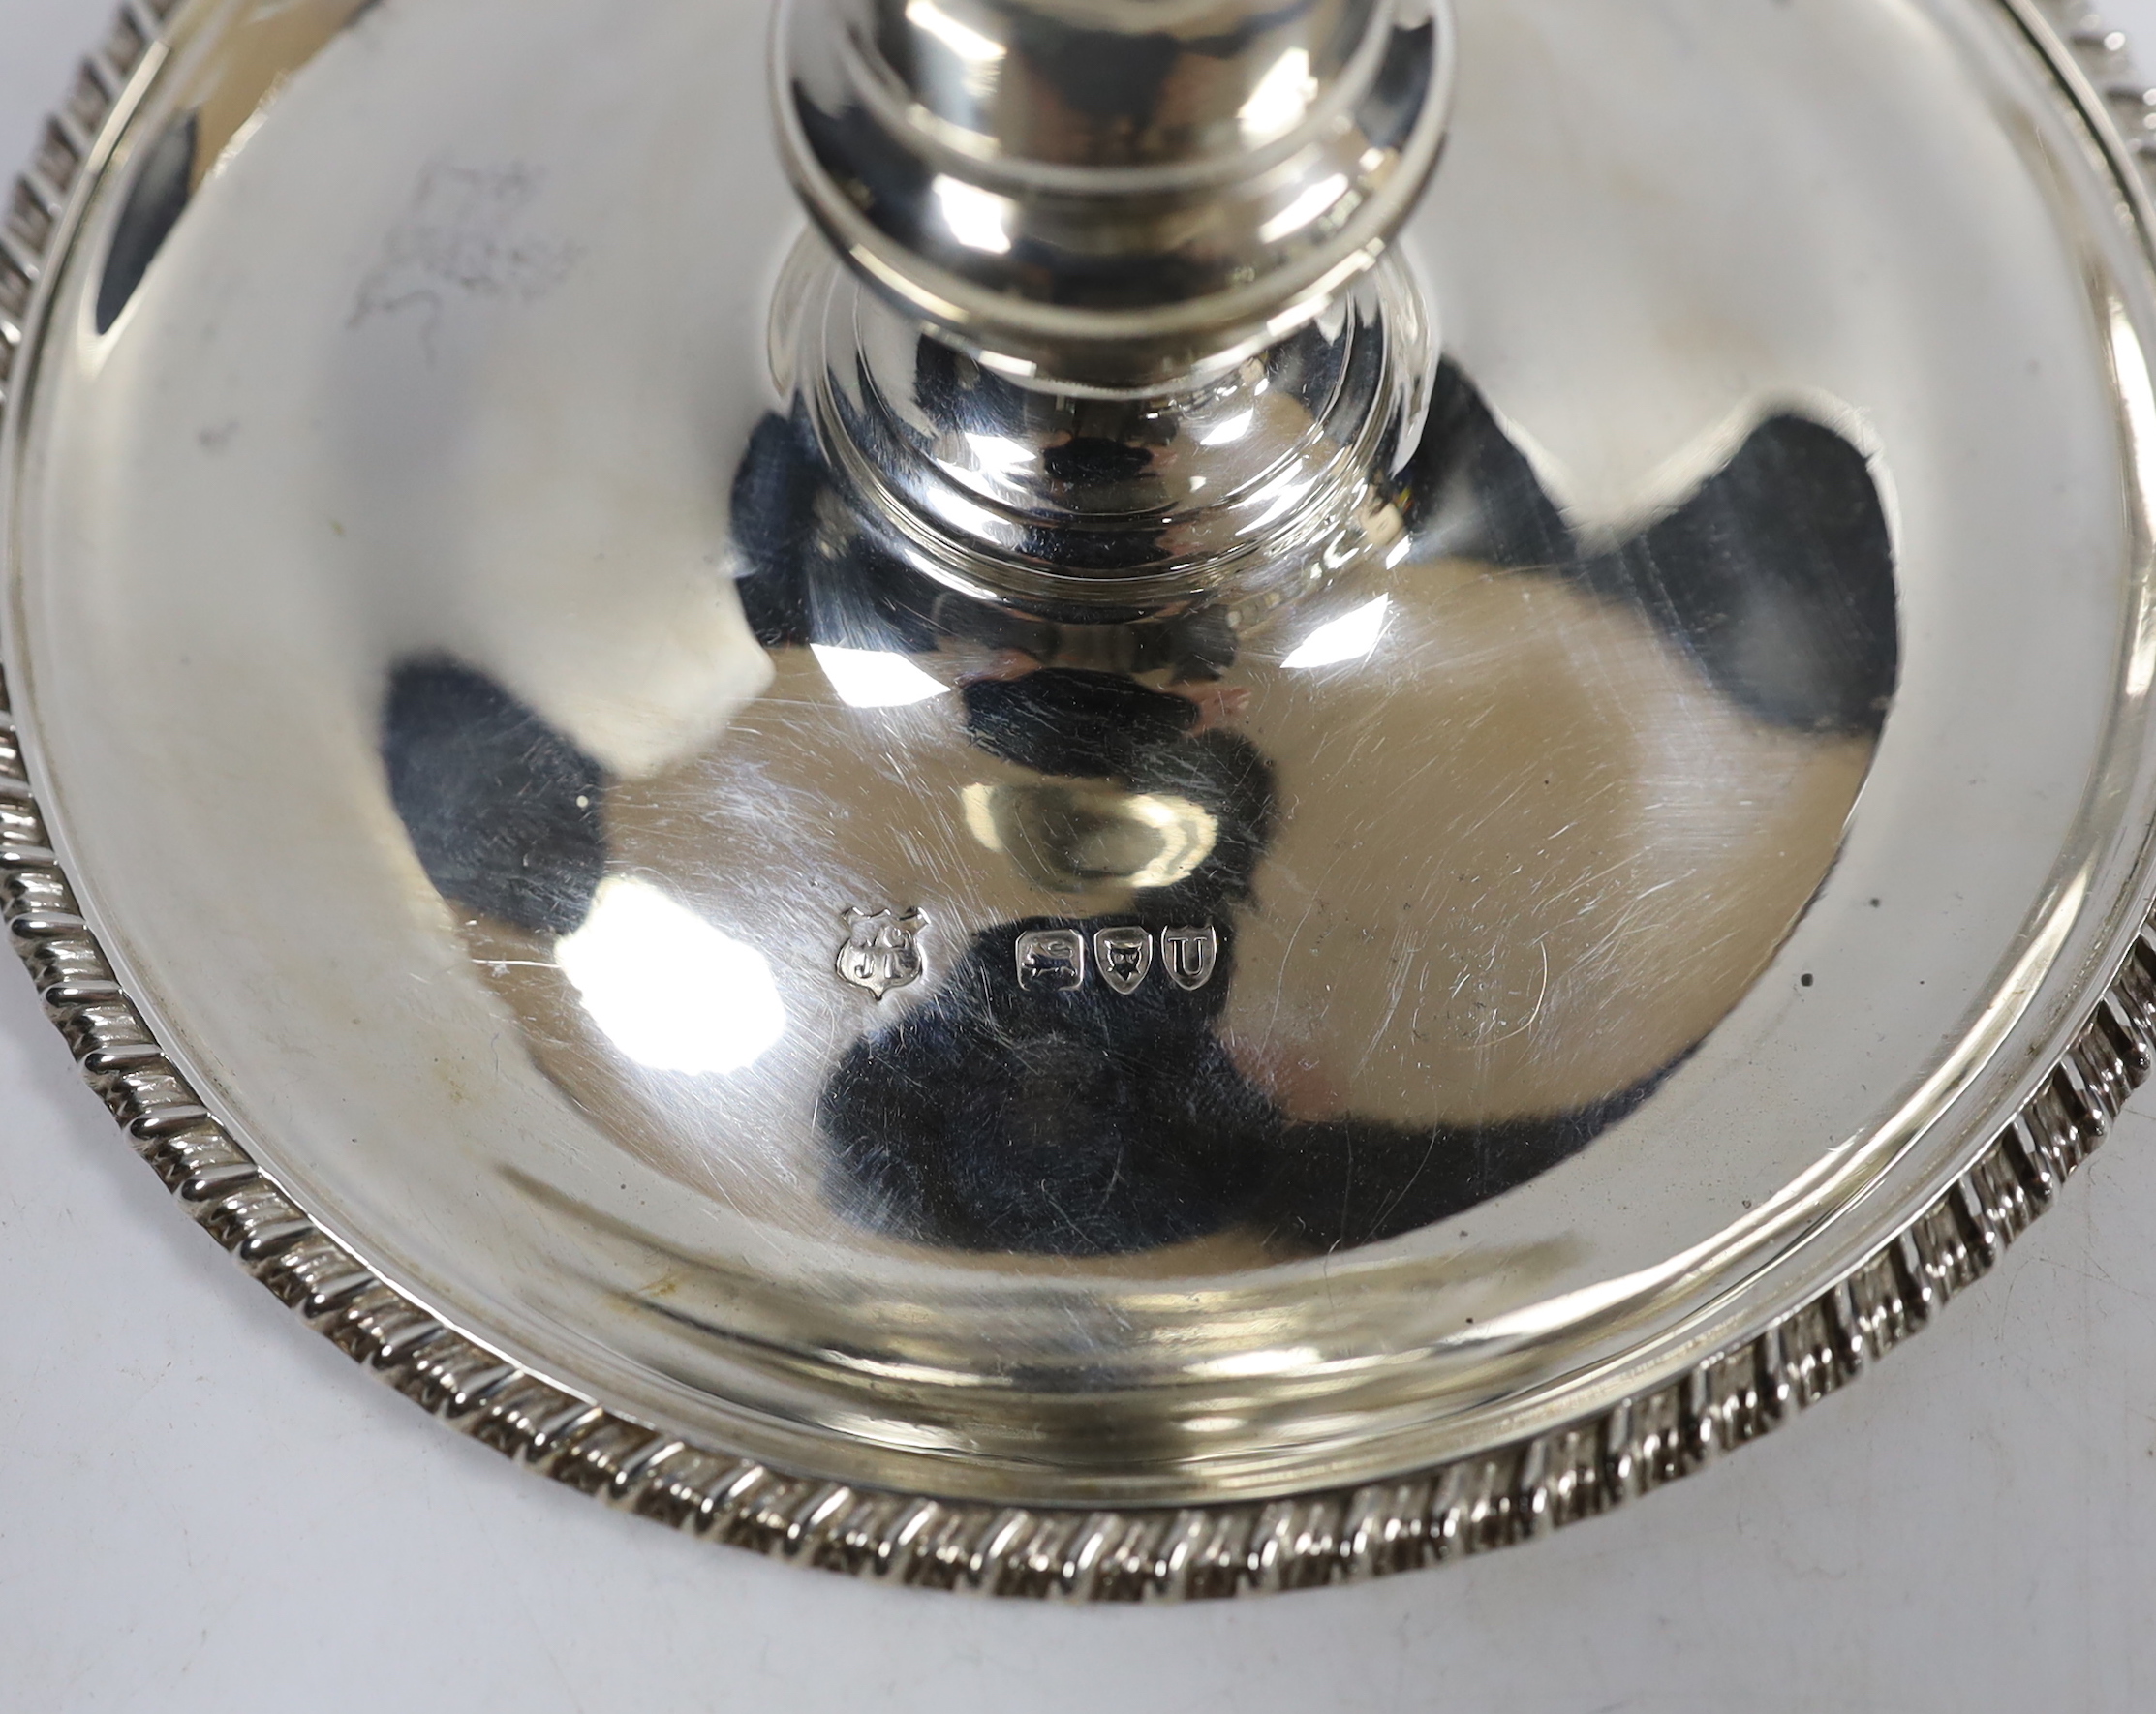 A late Victorian silver chamberstick and matching extinguisher, by Goldsmiths & Silversmiths, London, 1895, with gadrooned border, base diameter 15cm, 9.7oz.